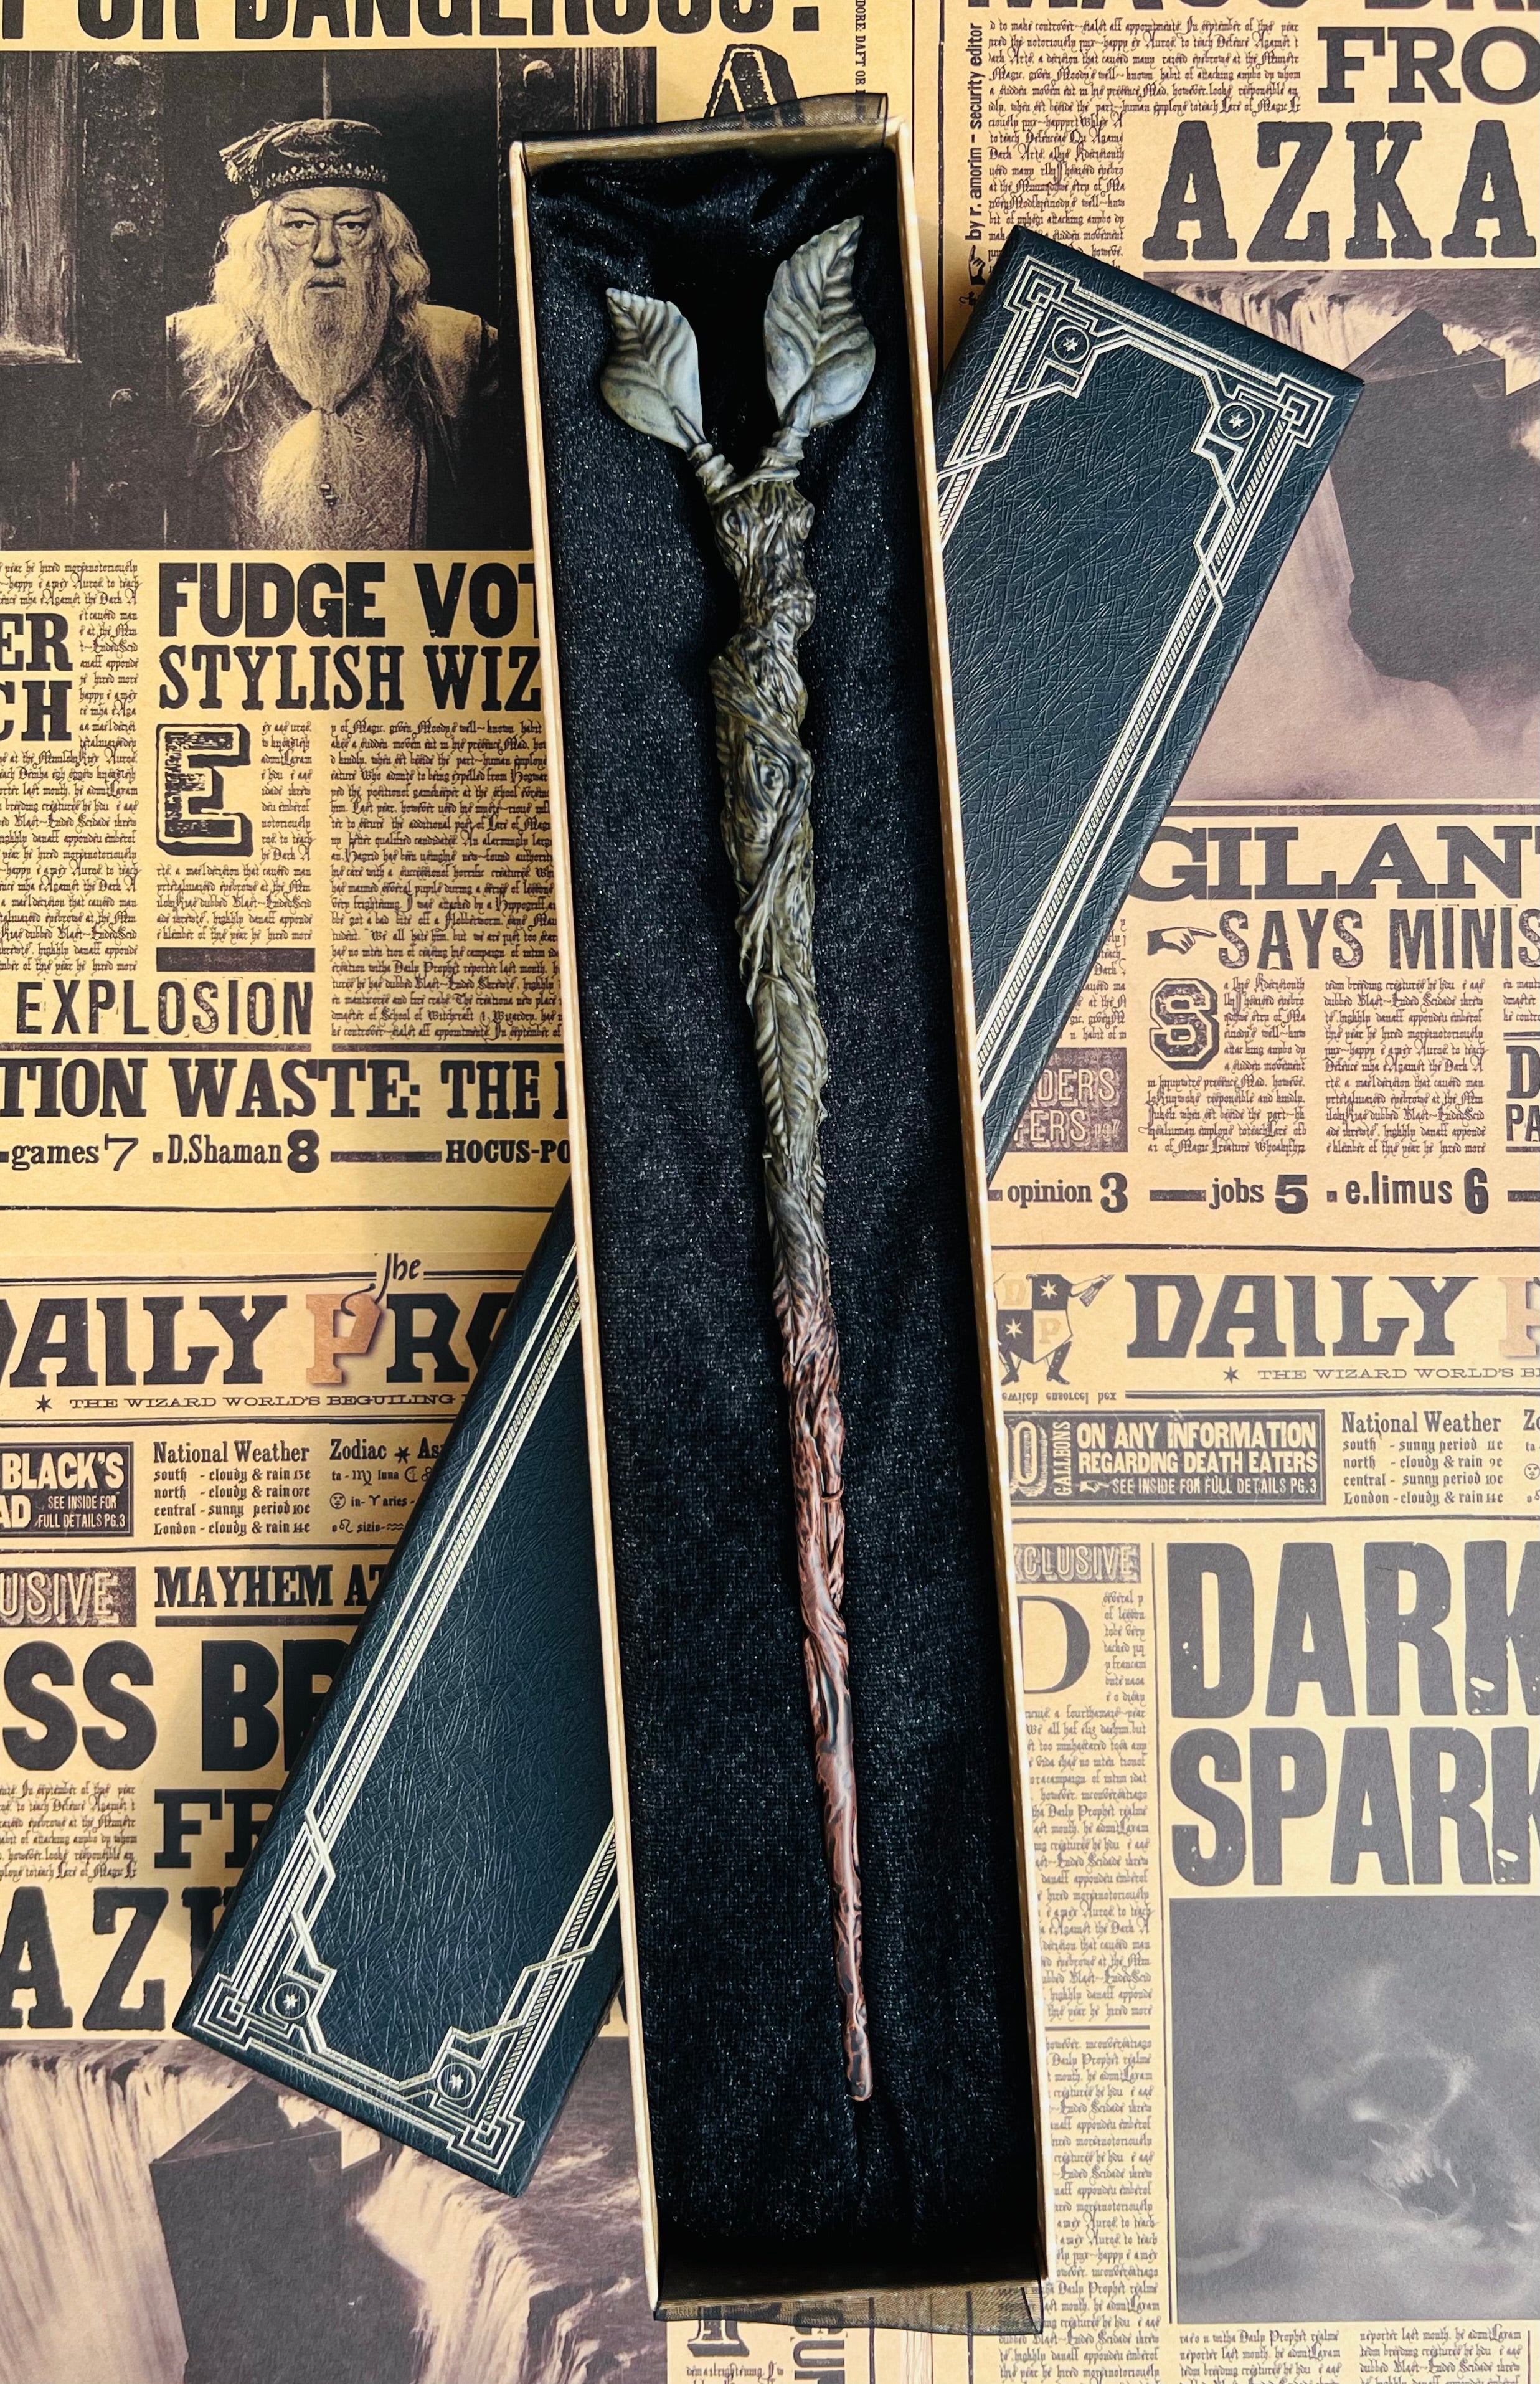 The Bowtruckle collectible stick